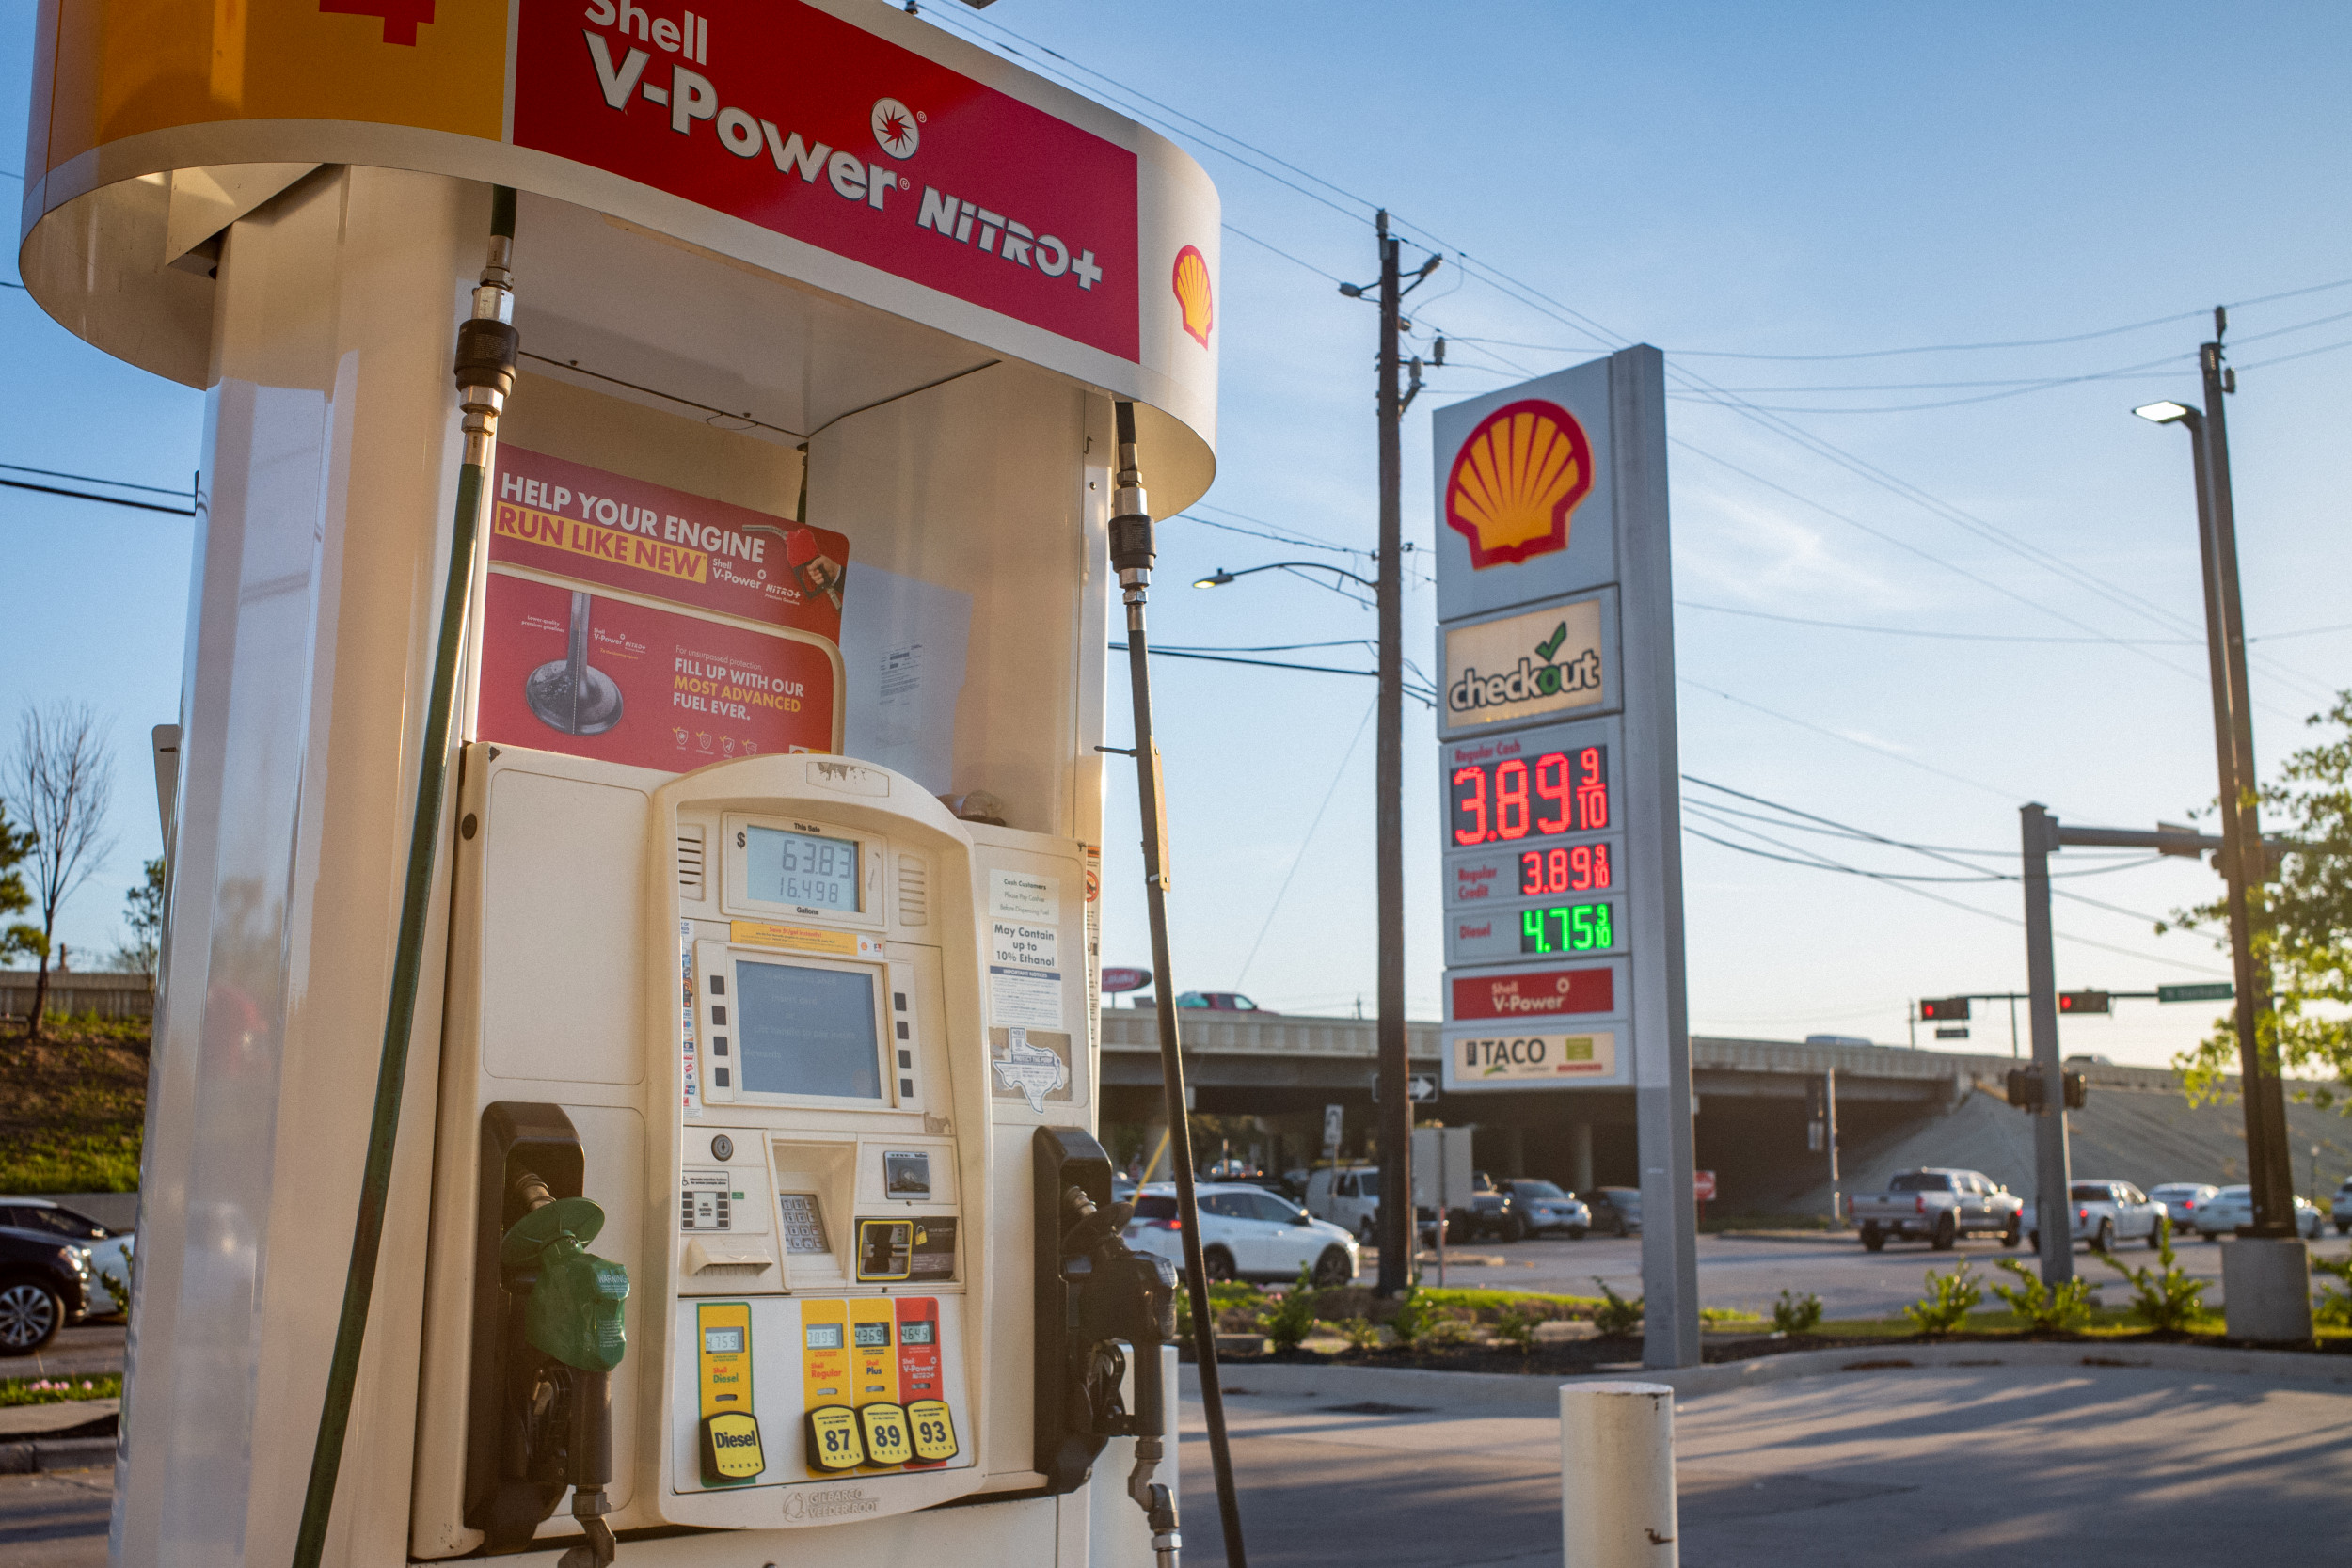 President of Shell USA Says Local Gas Stations Responsible for High Prices